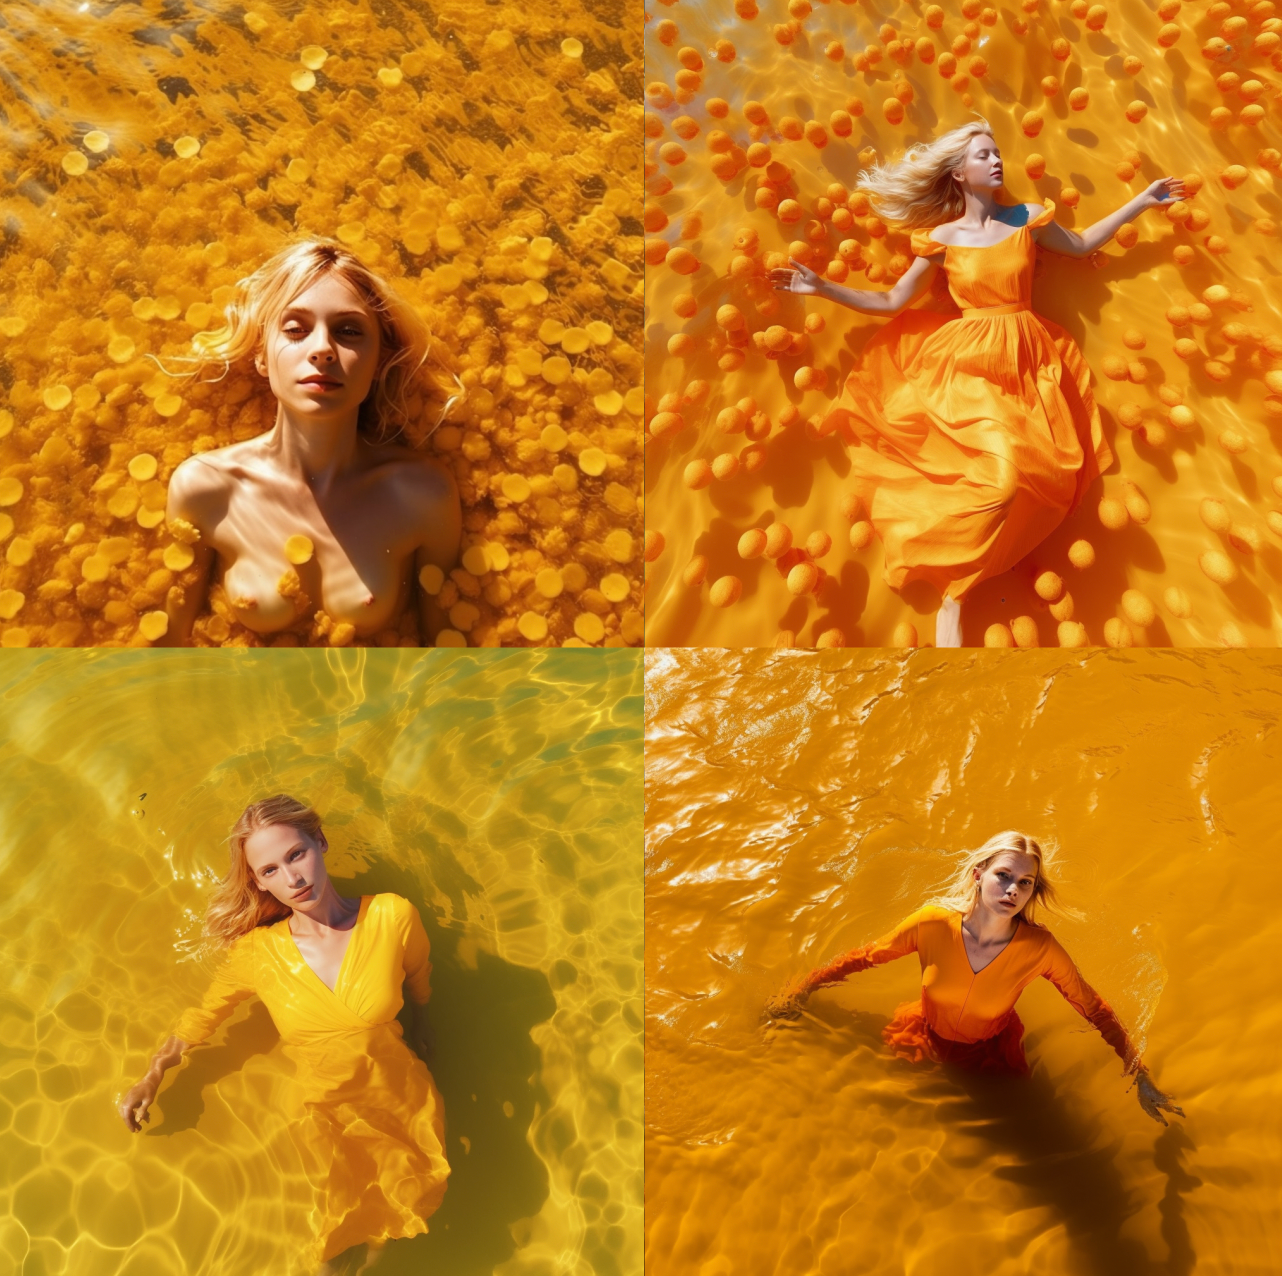 photo of a young woman with blond hair in a yellow summer dress swimming in sea of honey, bold orange